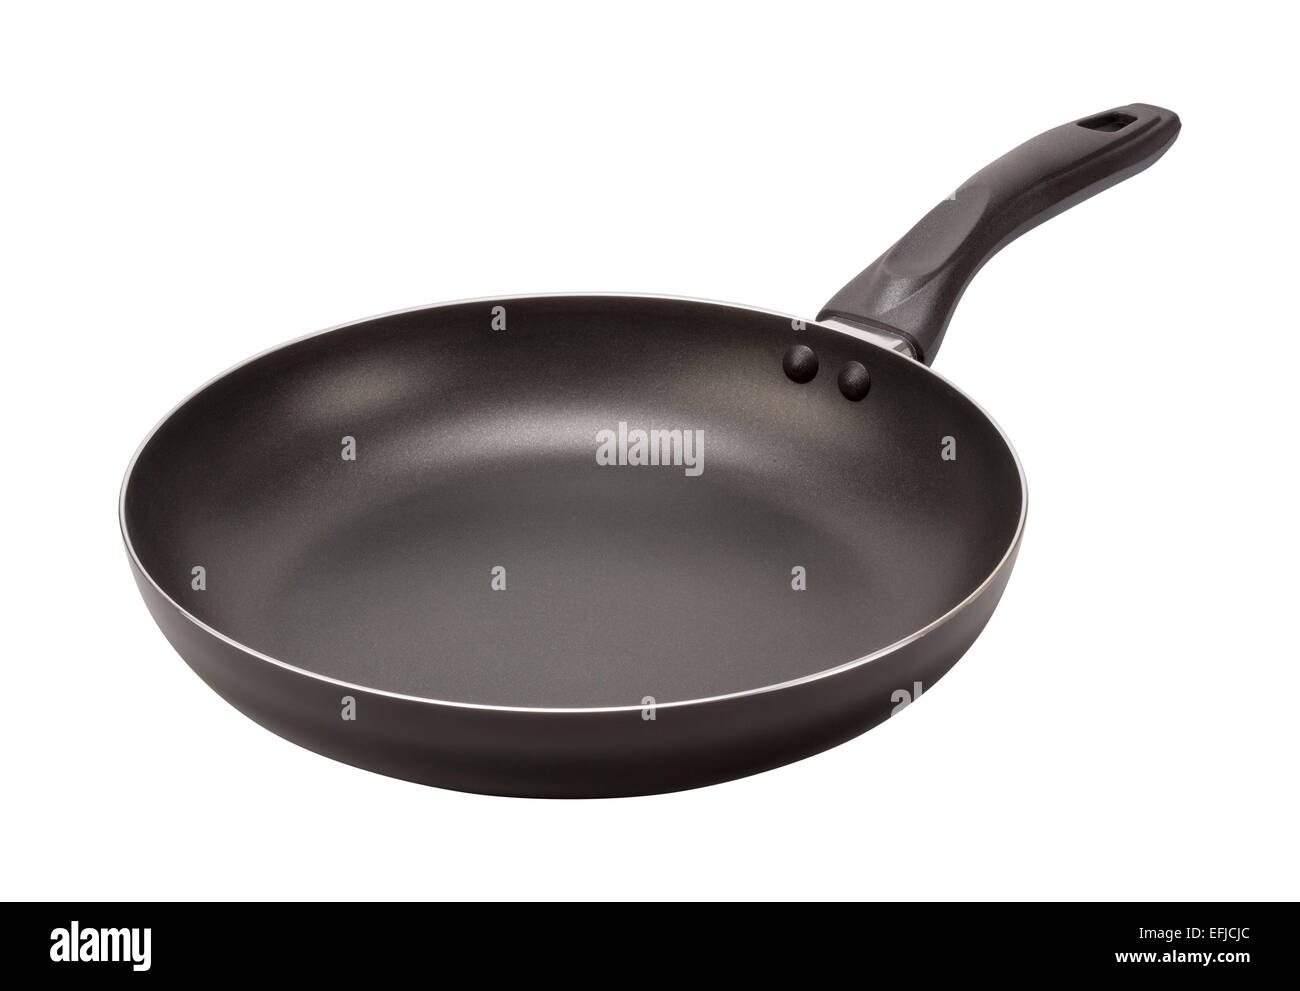 Empty Black Frying Pan isolated on white. The image is in full focus, front to back. Stock Photo